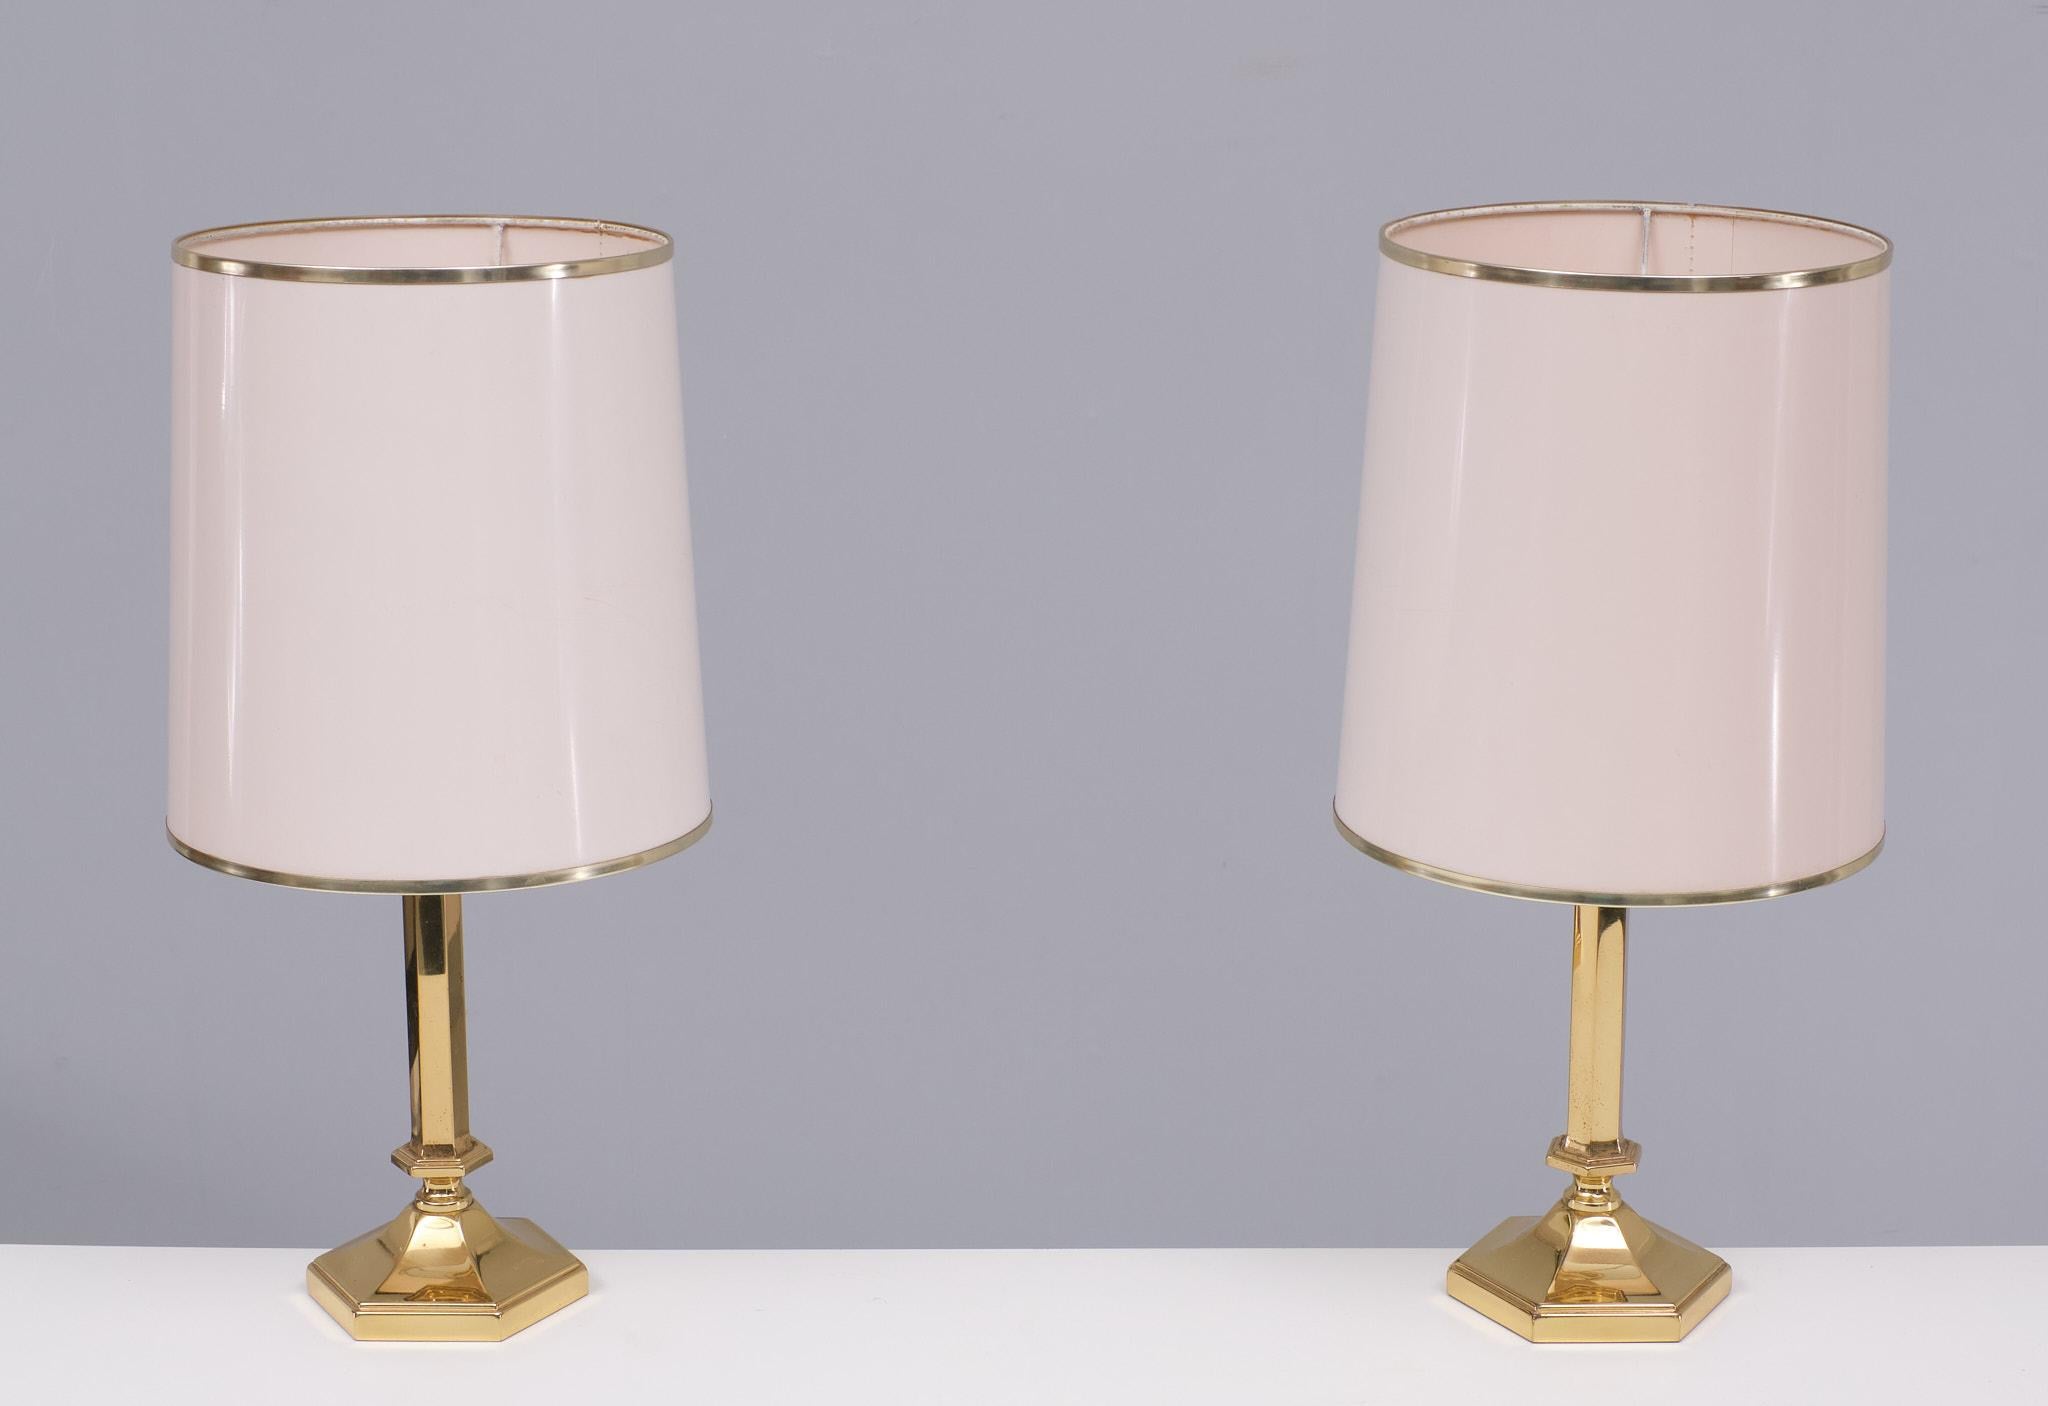 Pair of Brass table Lamps ,comes with there original White Shades ,
with Brass rims . Height with out shades 25 cm Diameter 12 cm .
Good condition . 